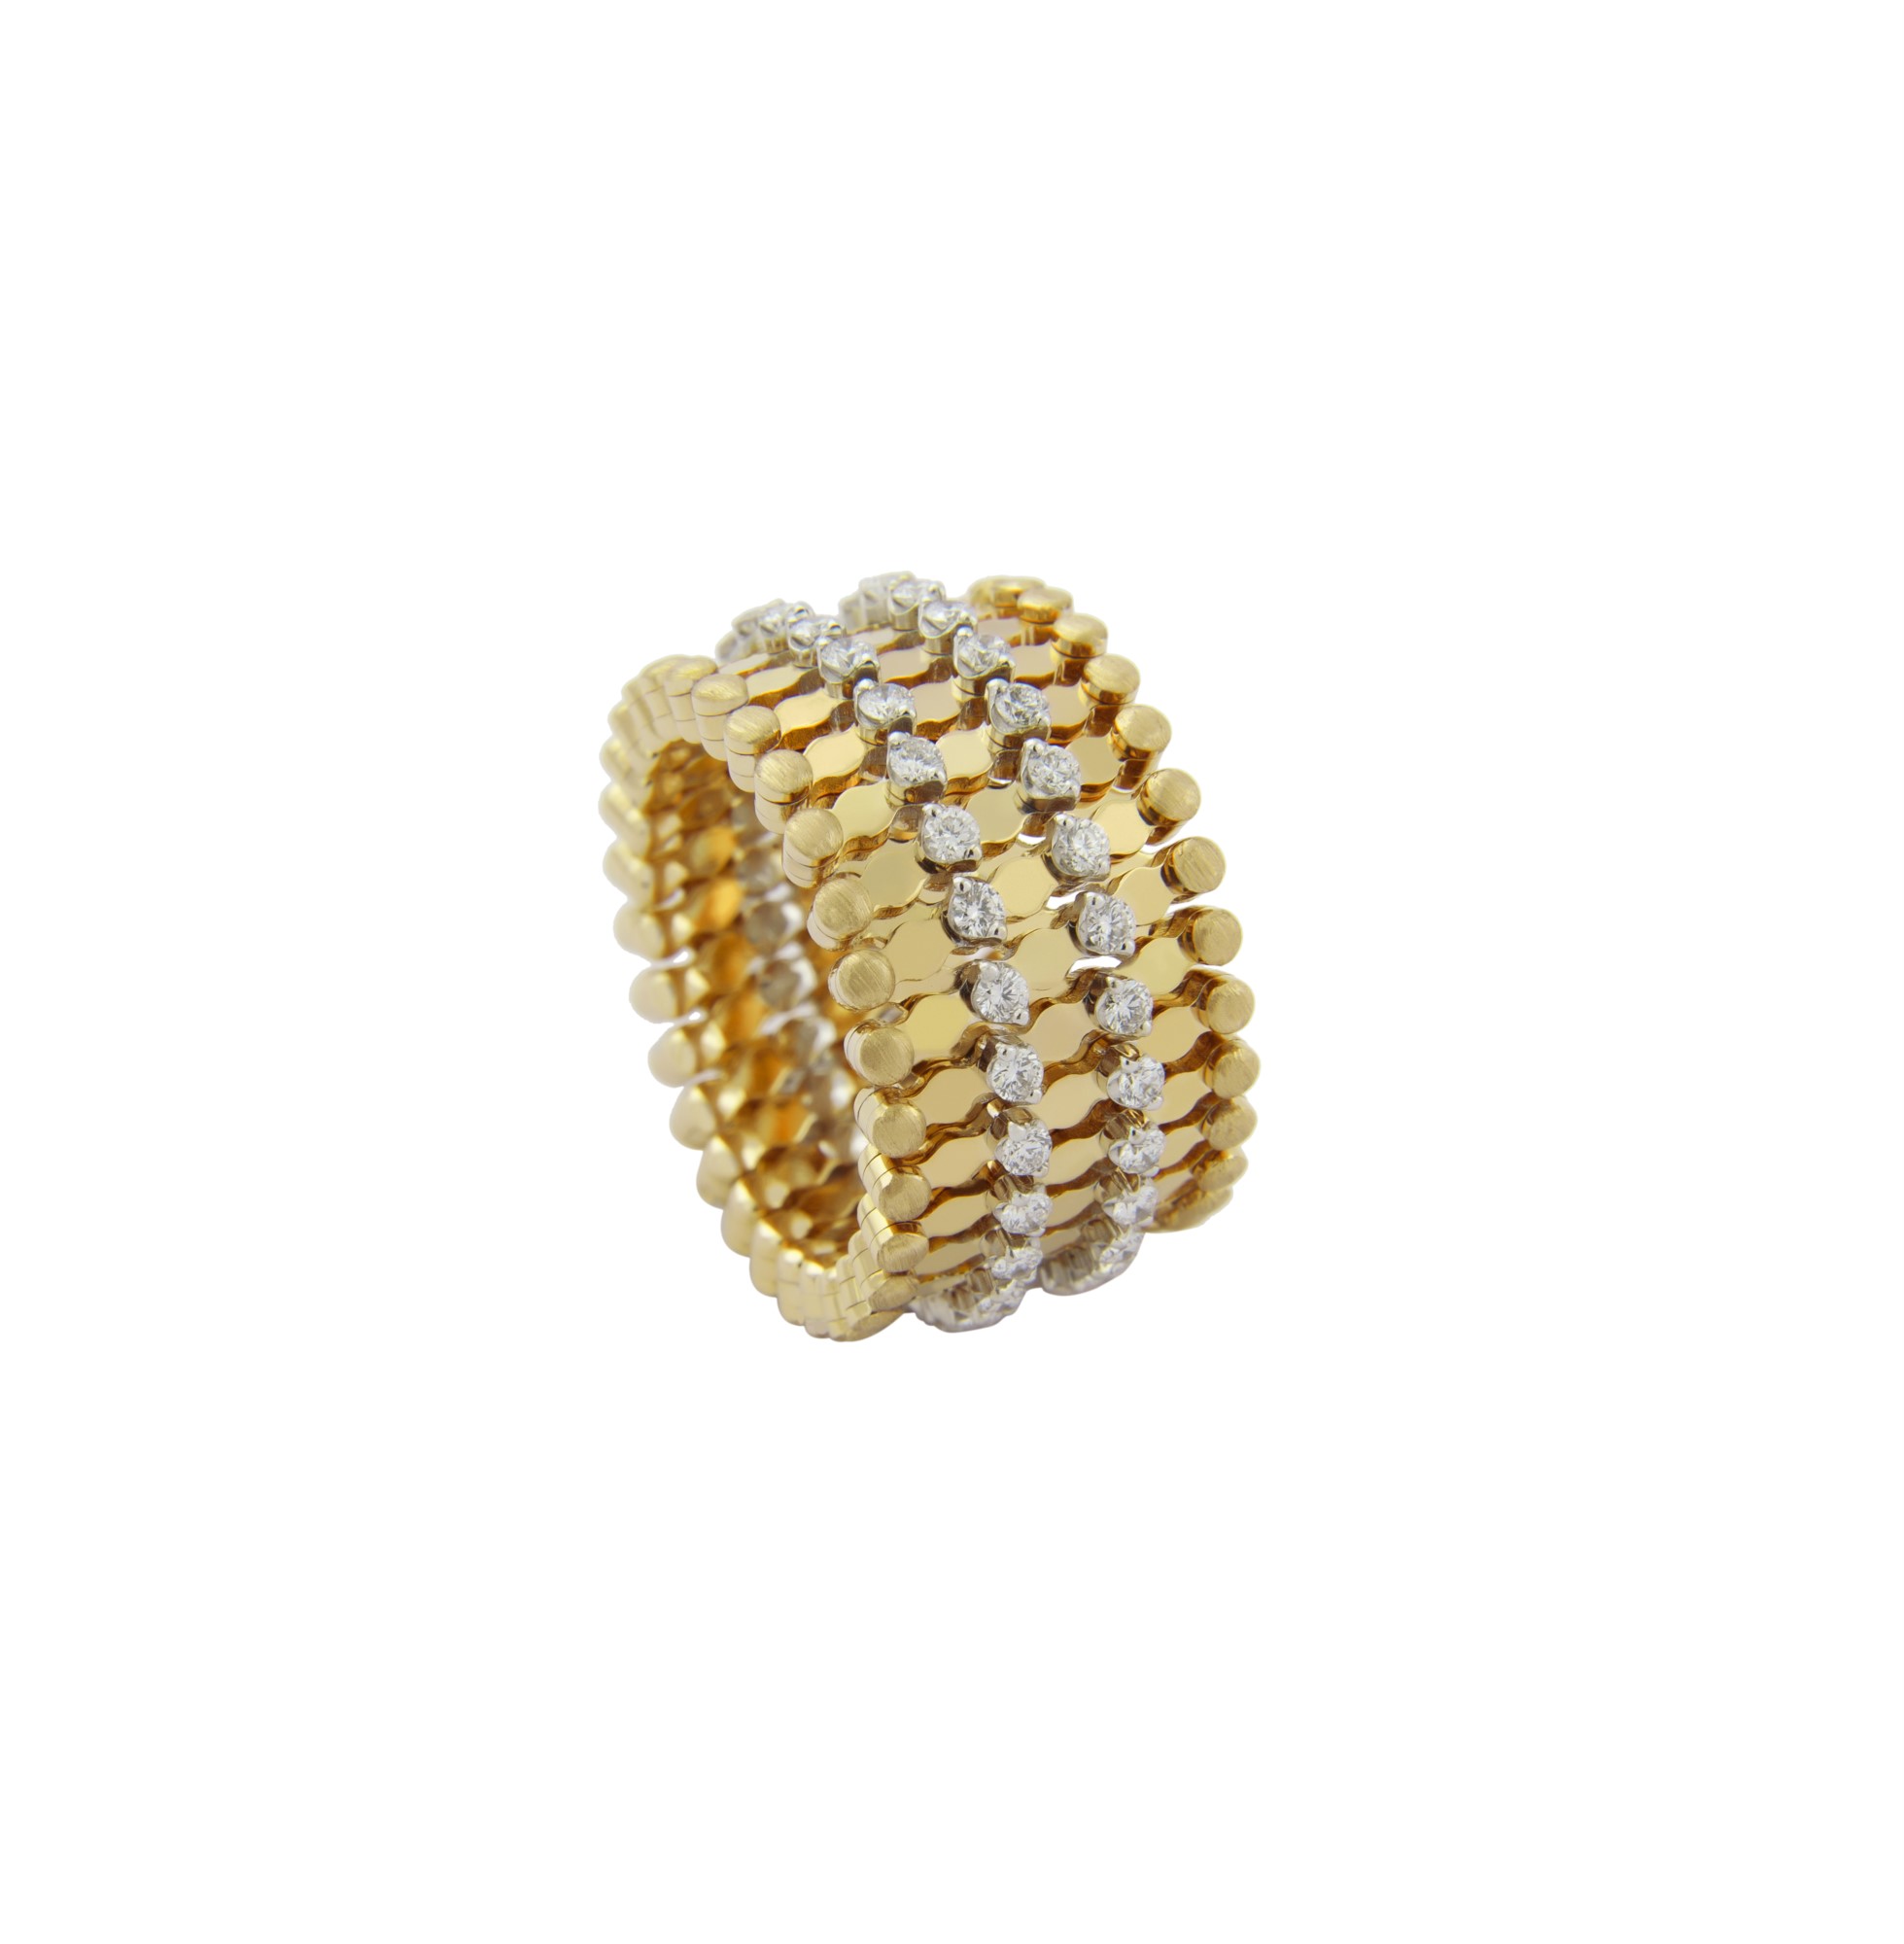 S.RB A-7M2 YWG WD   Dia Whi  Serafino Consoli Gold Ring with Stones S.RB A-7M2 YWG WD